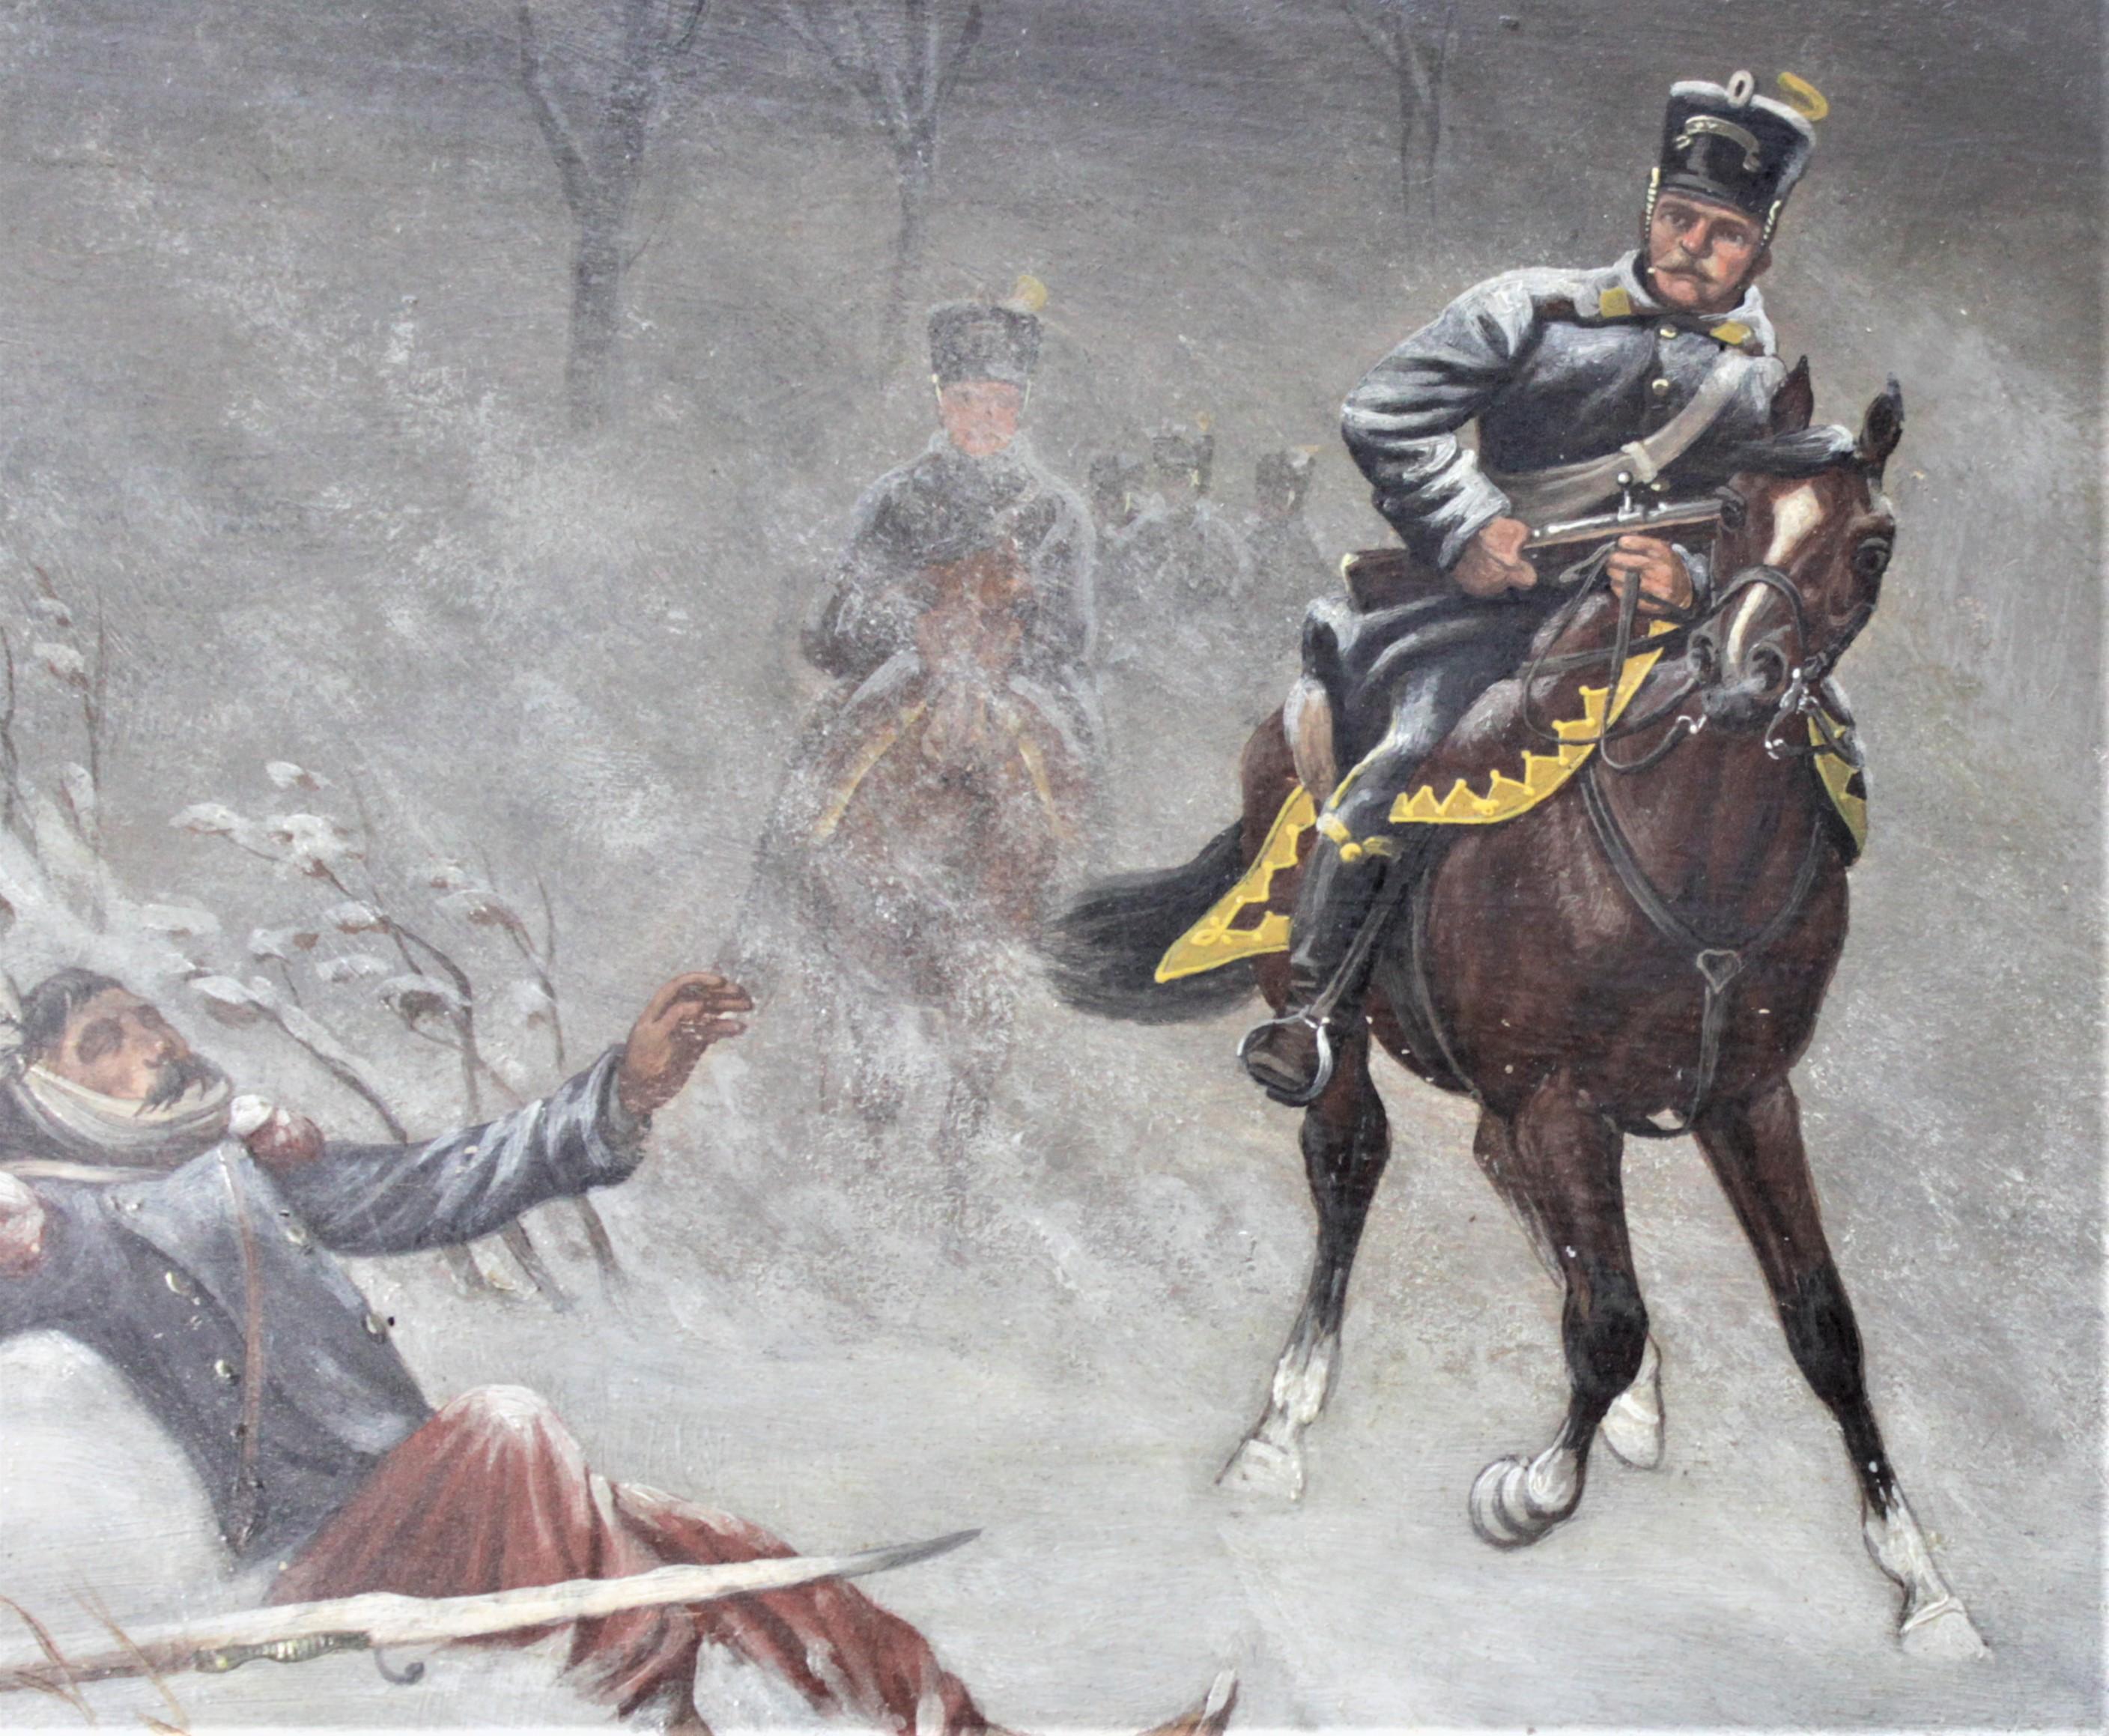 Hand-Painted Original Christian Sell Oil Painting on Panel of Soldiers in Battle For Sale